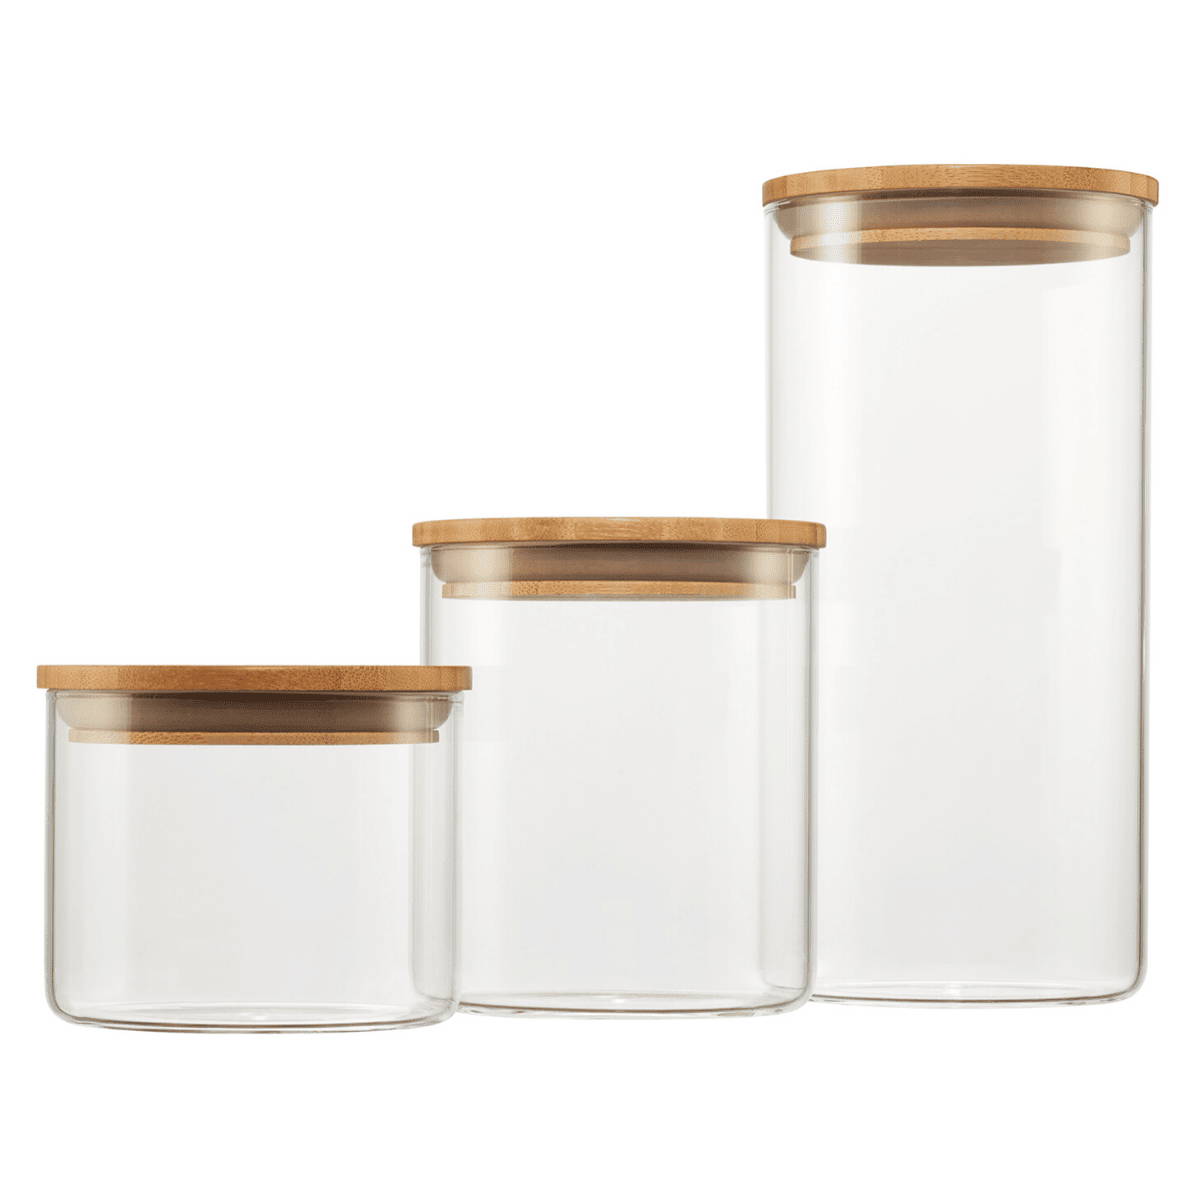 3 set of medium size glass canisters